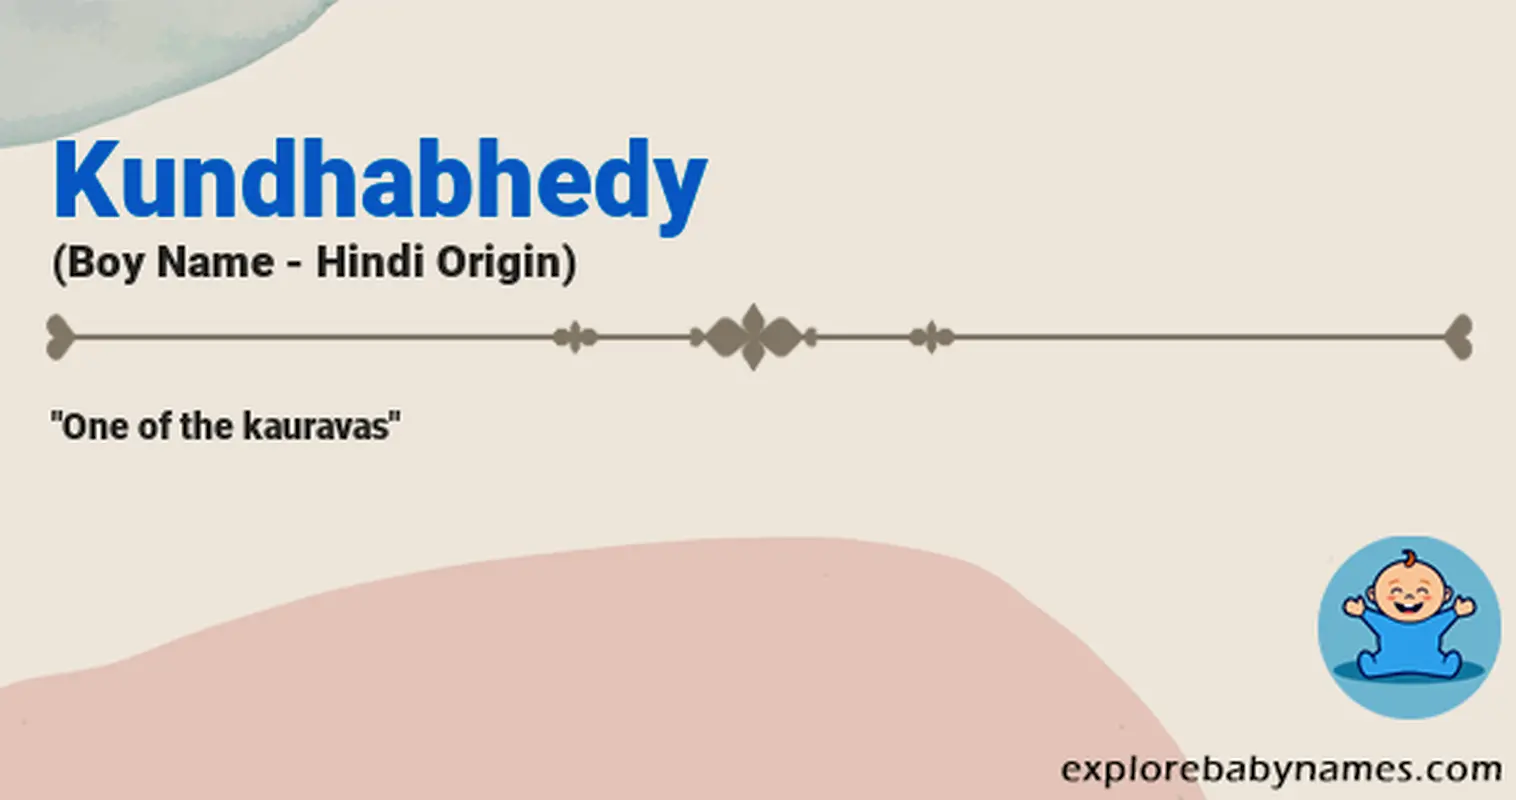 Meaning of Kundhabhedy